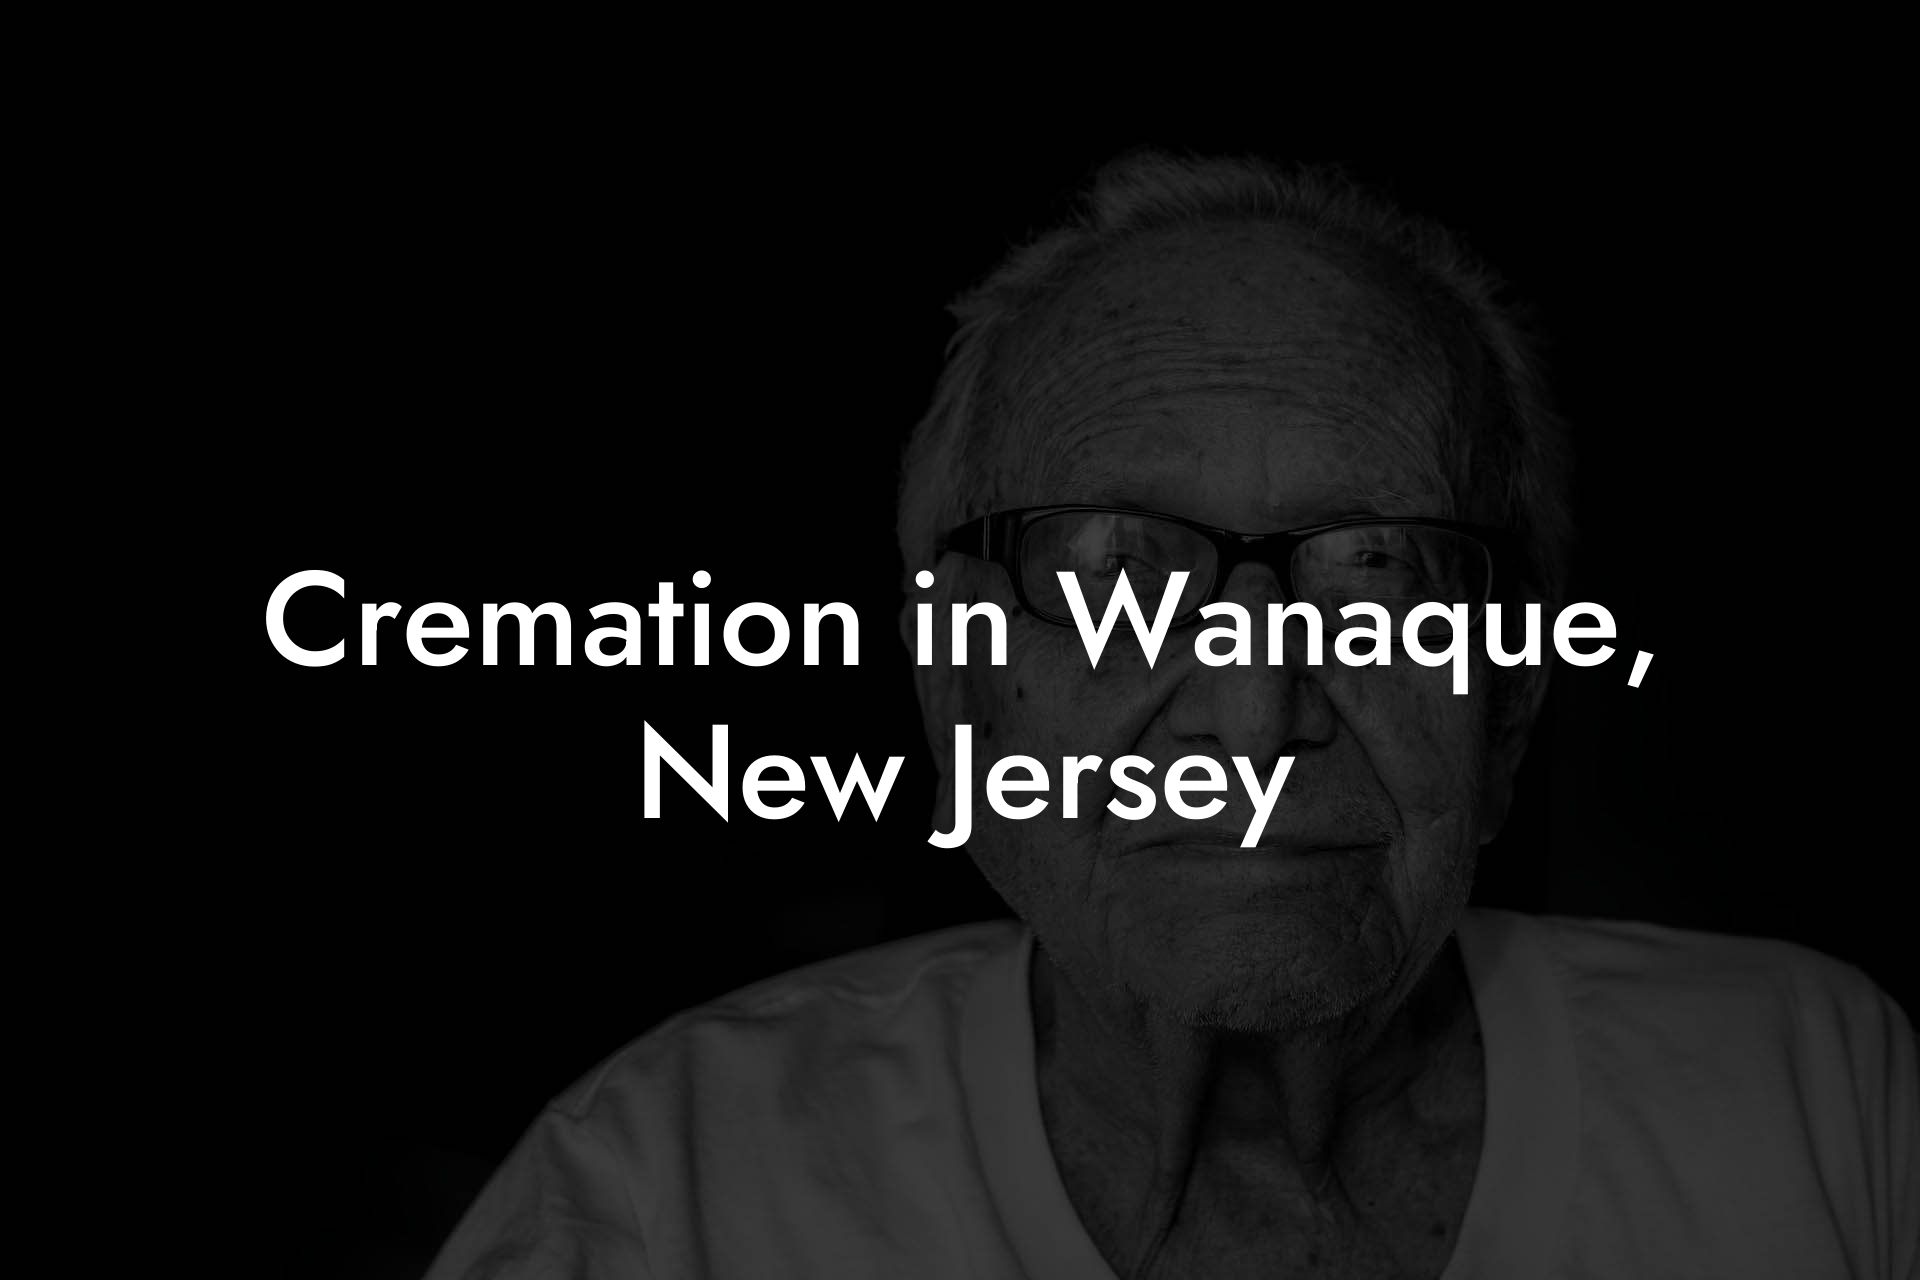 Cremation in Wanaque, New Jersey